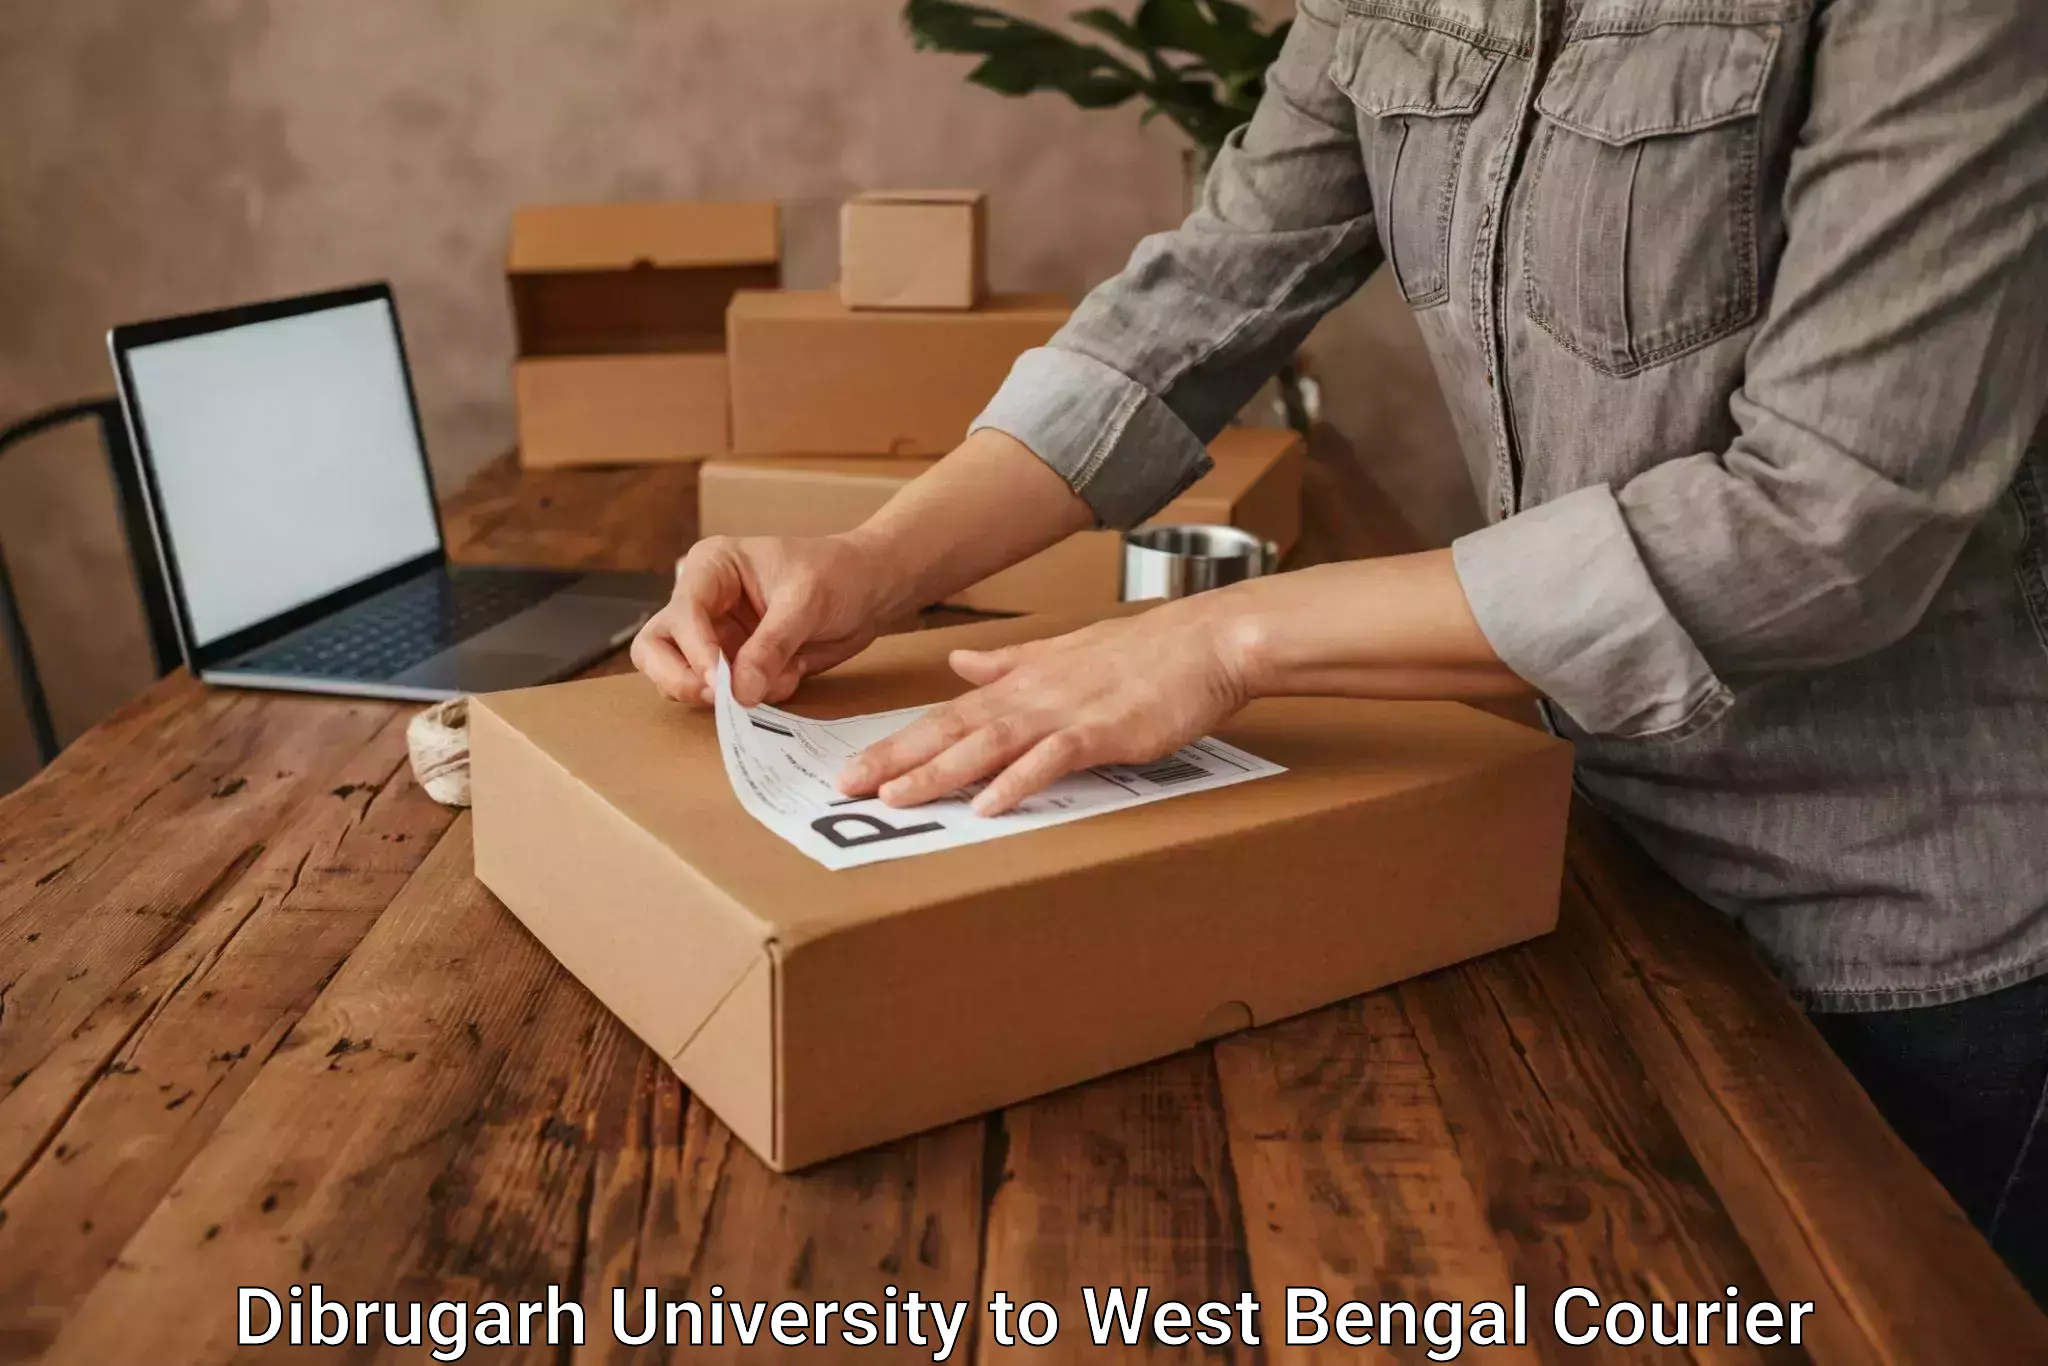 Large package courier Dibrugarh University to Ama Dubi